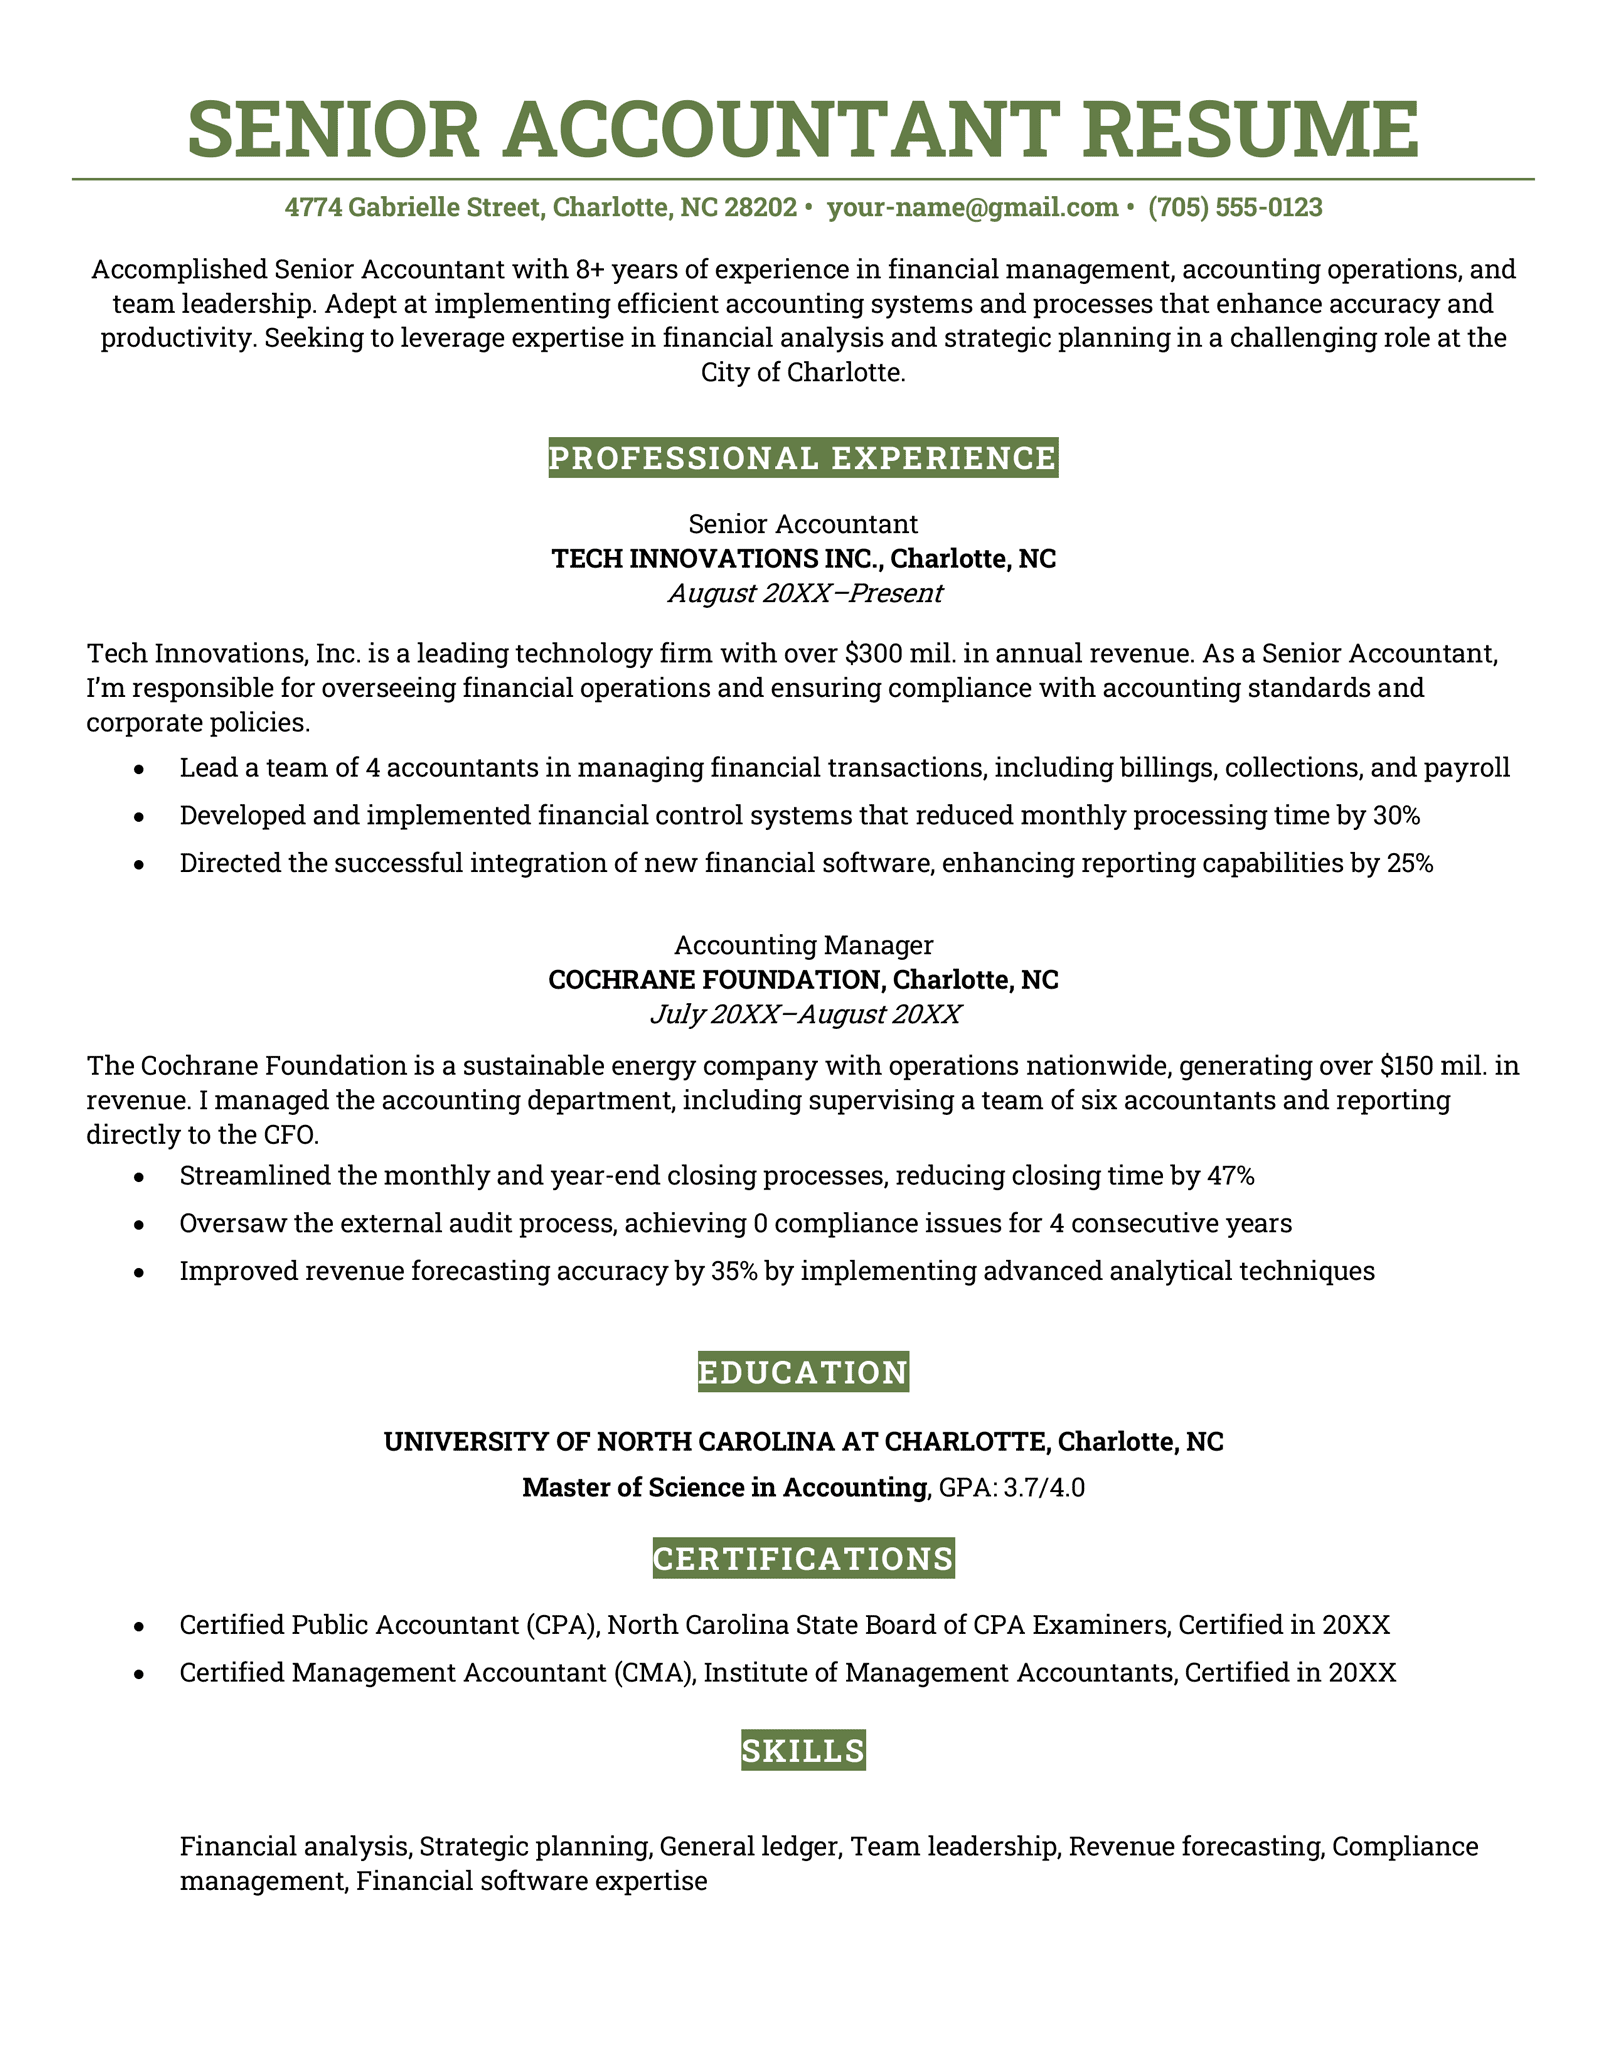 A senior accountant resume with a green color scheme and bold color swatch resume section headers.